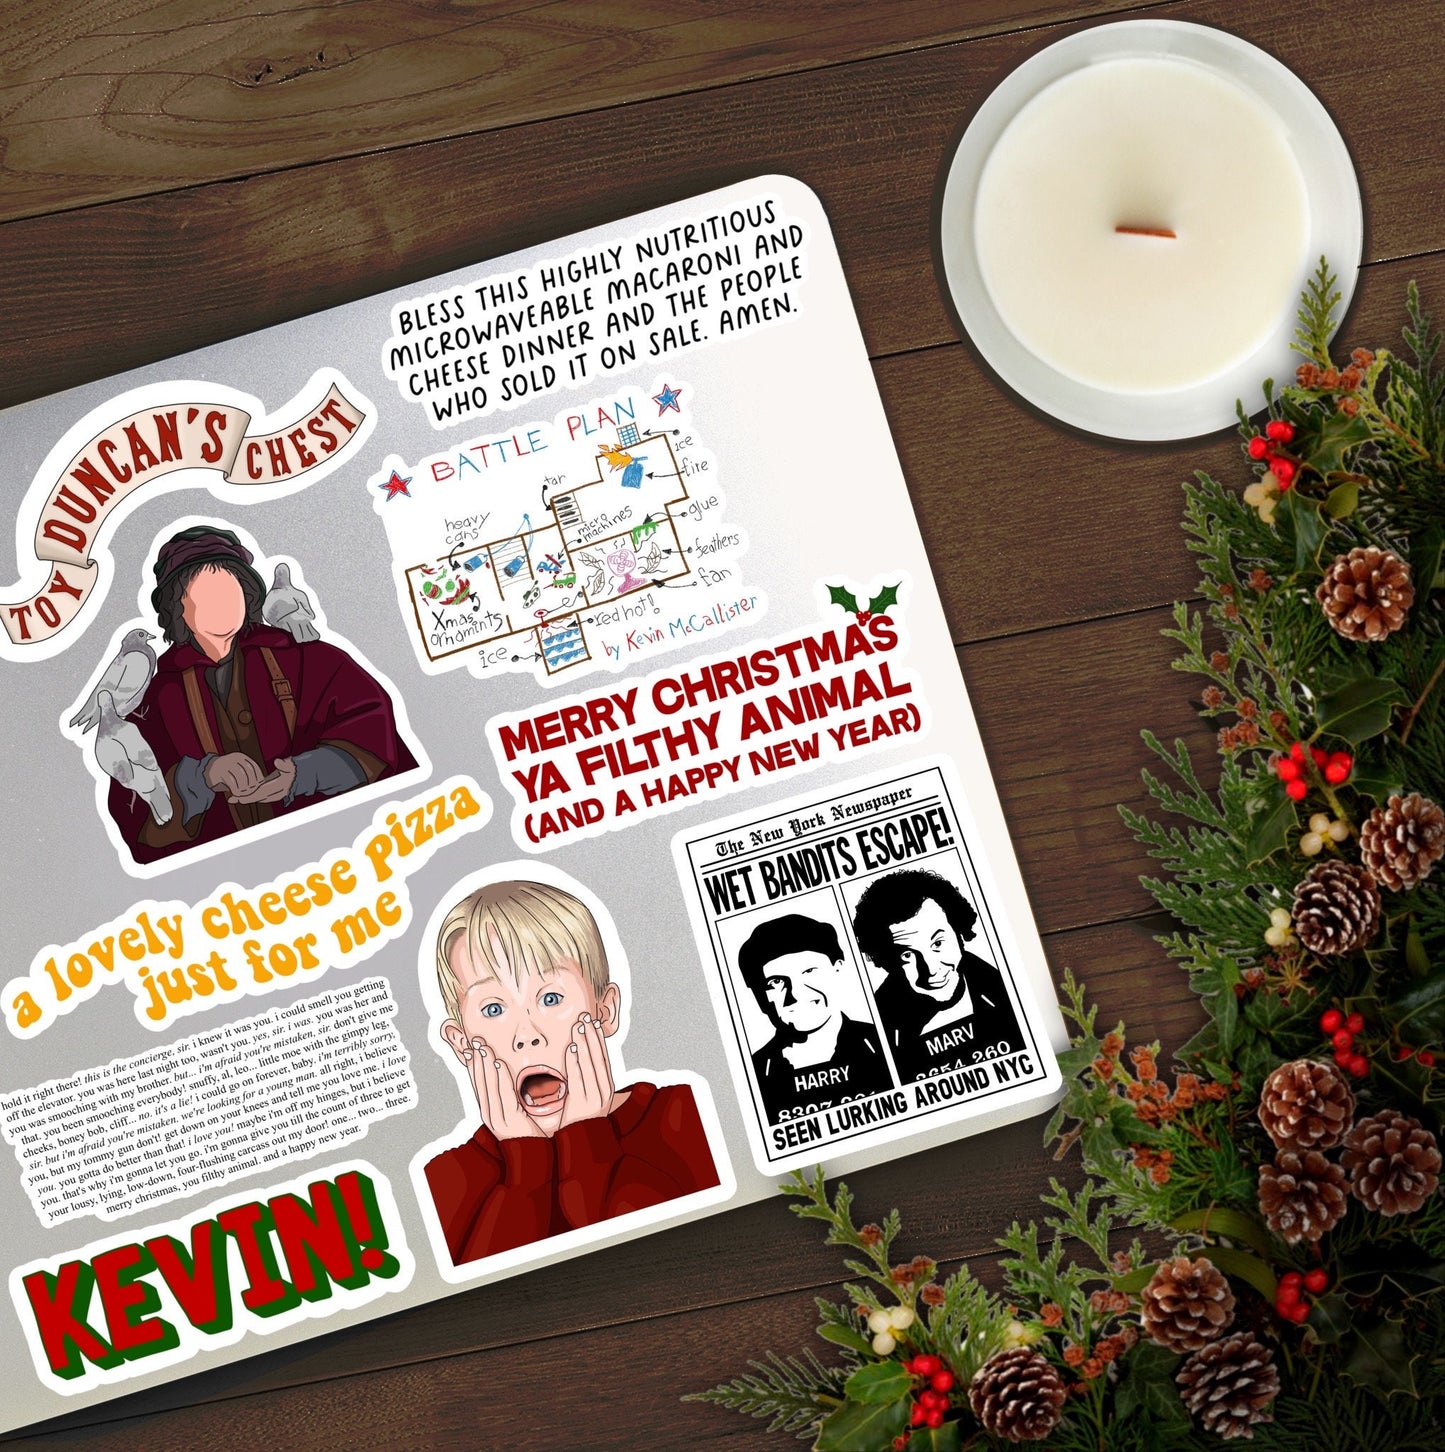 Kevin! | Home Alone Stickers